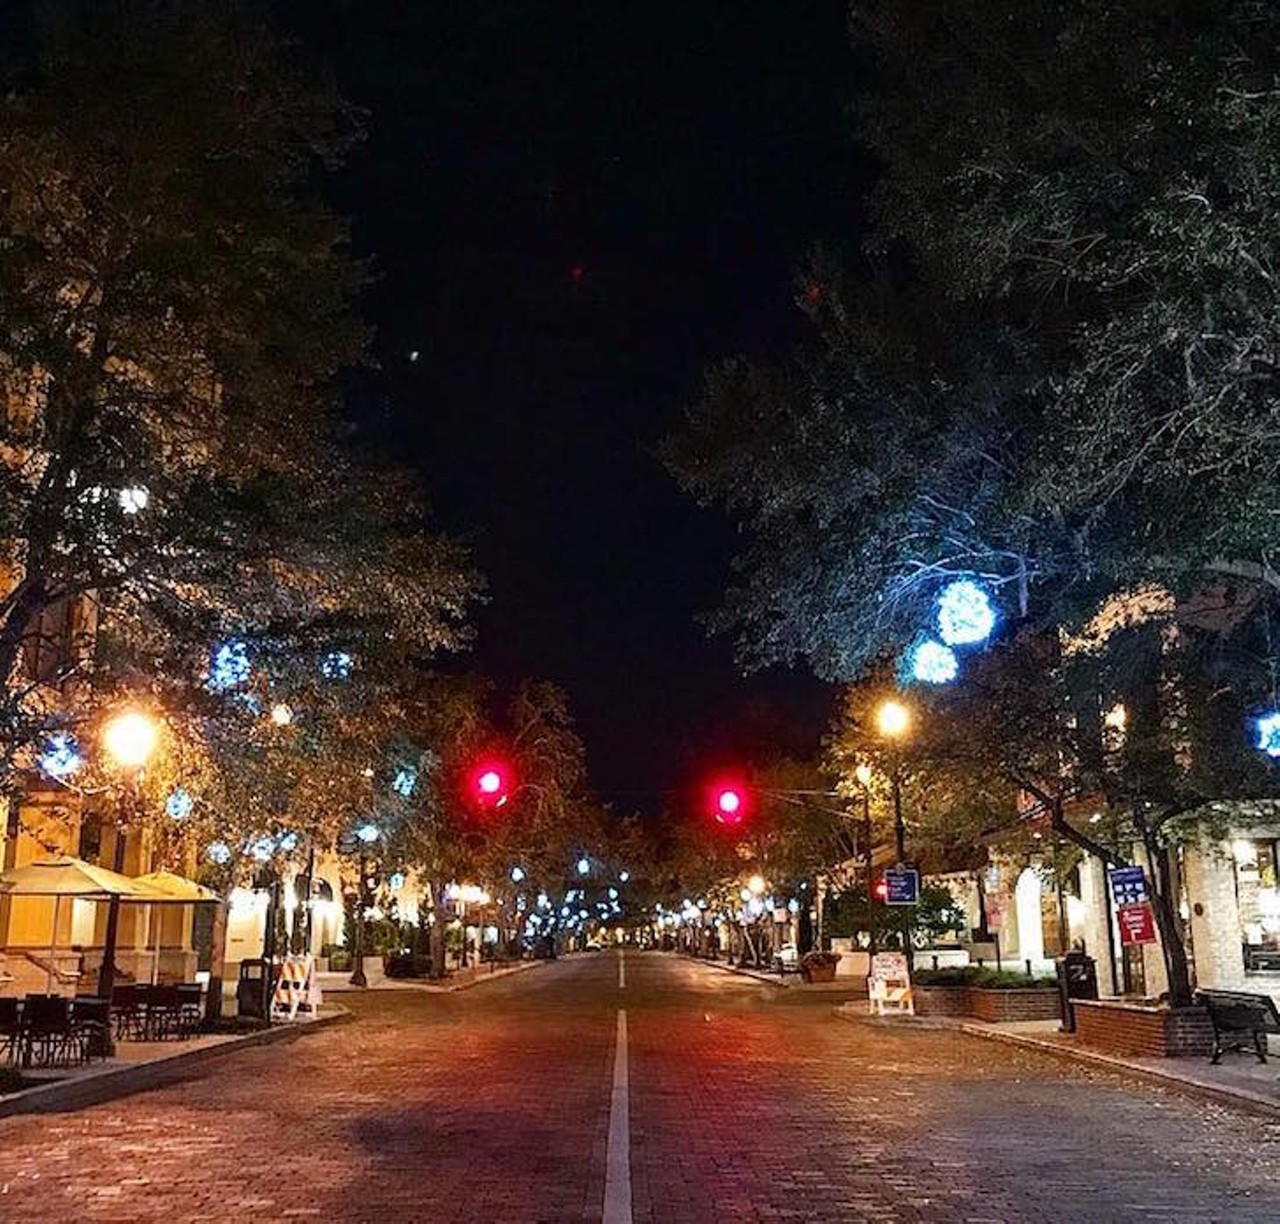 @orlandoissleeping
The sleepy streets of Orlando are captured by a travel nurse working the graveyard shift. This is a must follow.